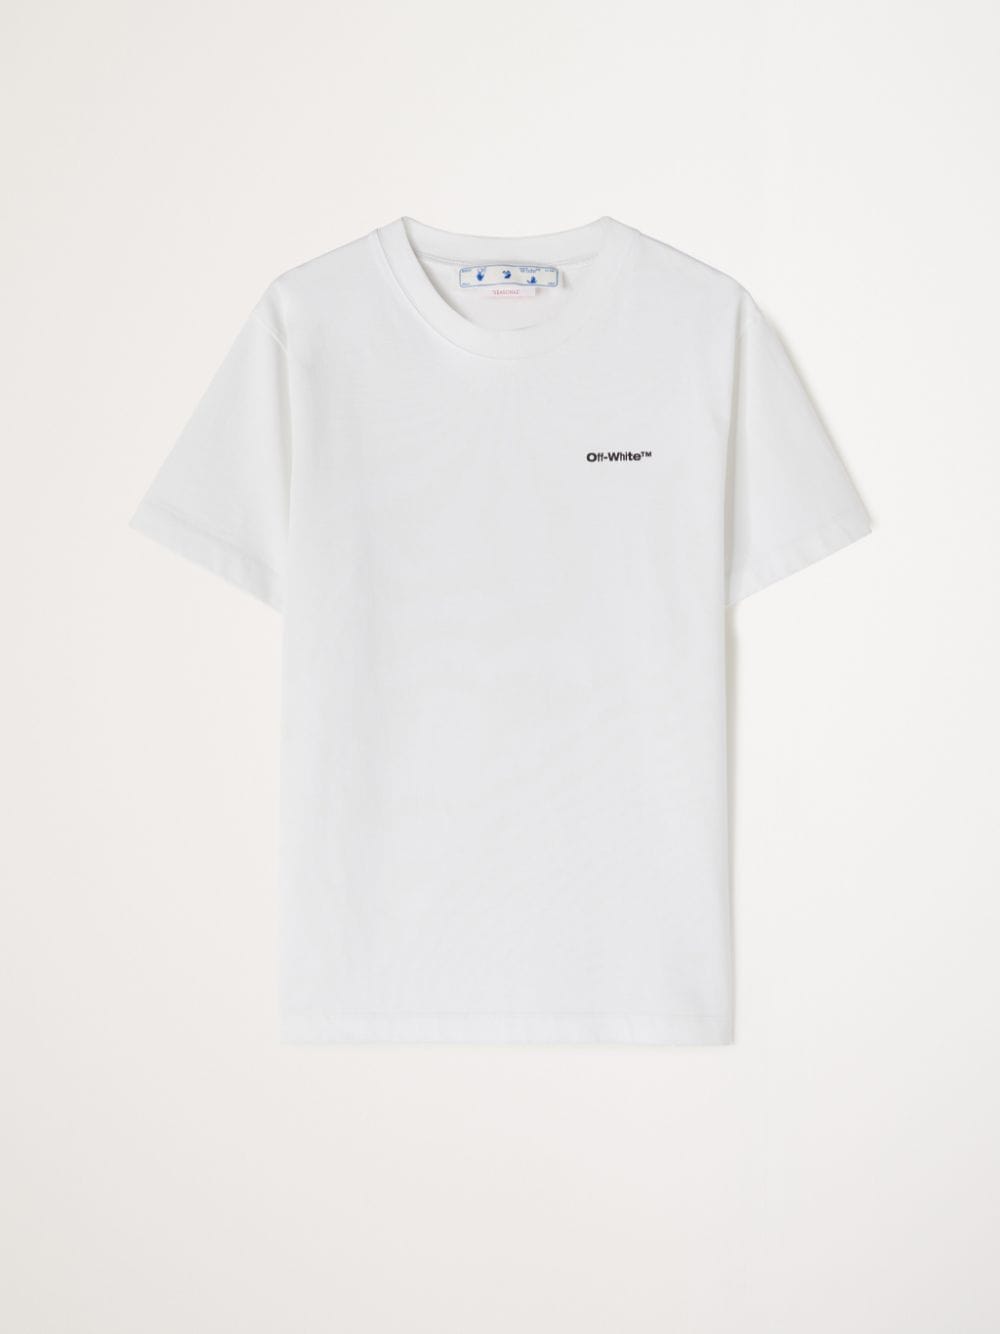 WAVE OUTL DIAG SLIM S/S TEE